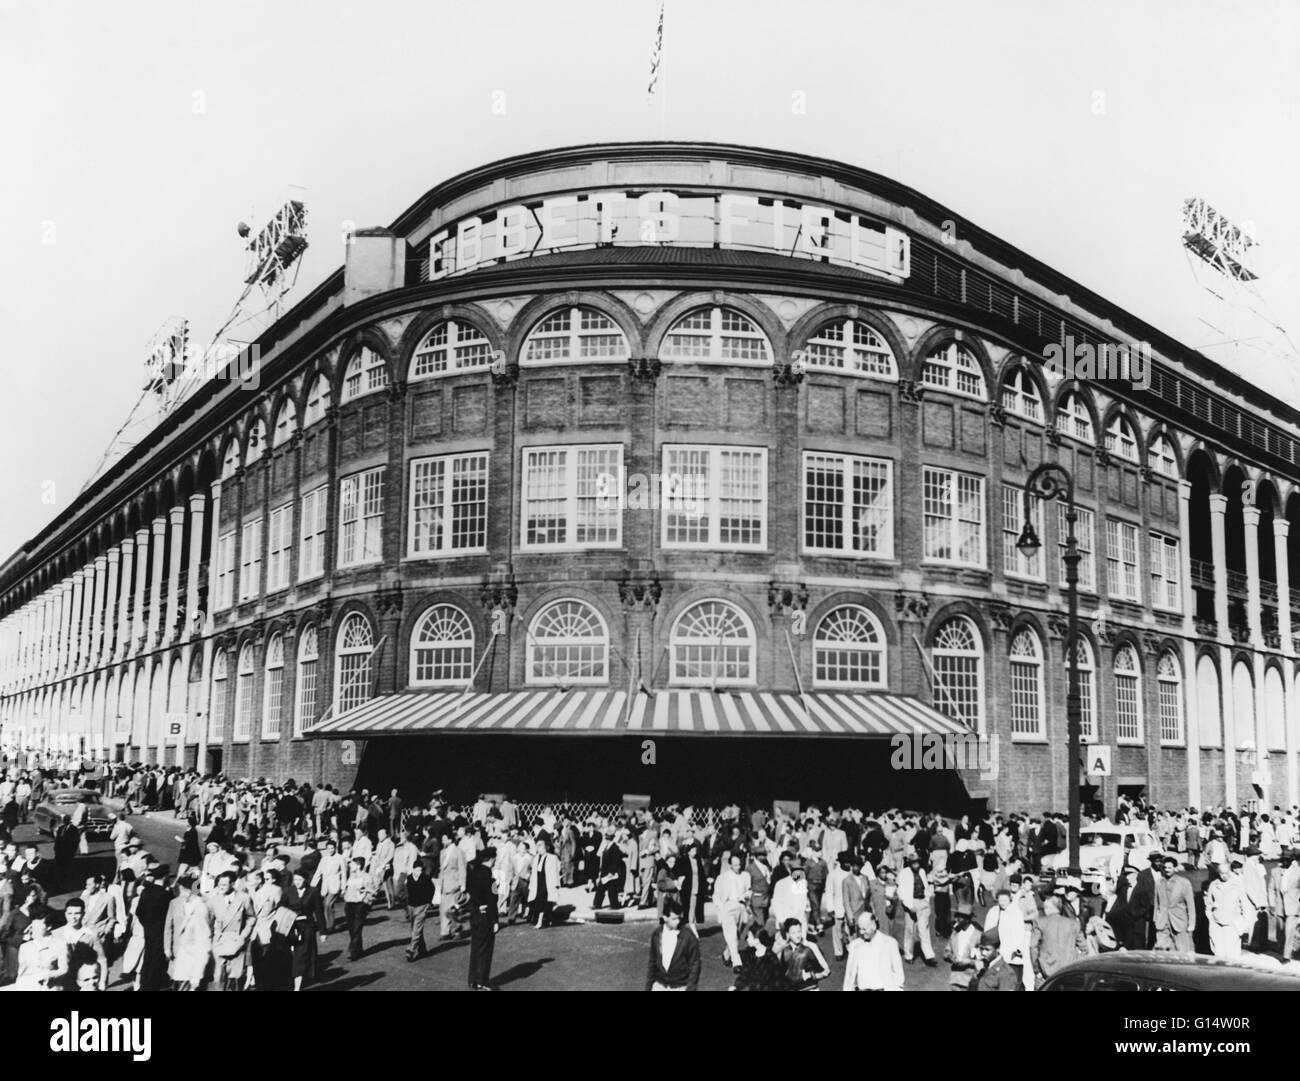 Ebbets Field, circa 1950s. Ebbets Field was a Major League Baseball park and home of the Brooklyn Dodgers in Brooklyn, New York. The stadium was torn down in 1960 and replaced with apartment buildings, now in the Crown Heights section of Brooklyn. Stock Photo